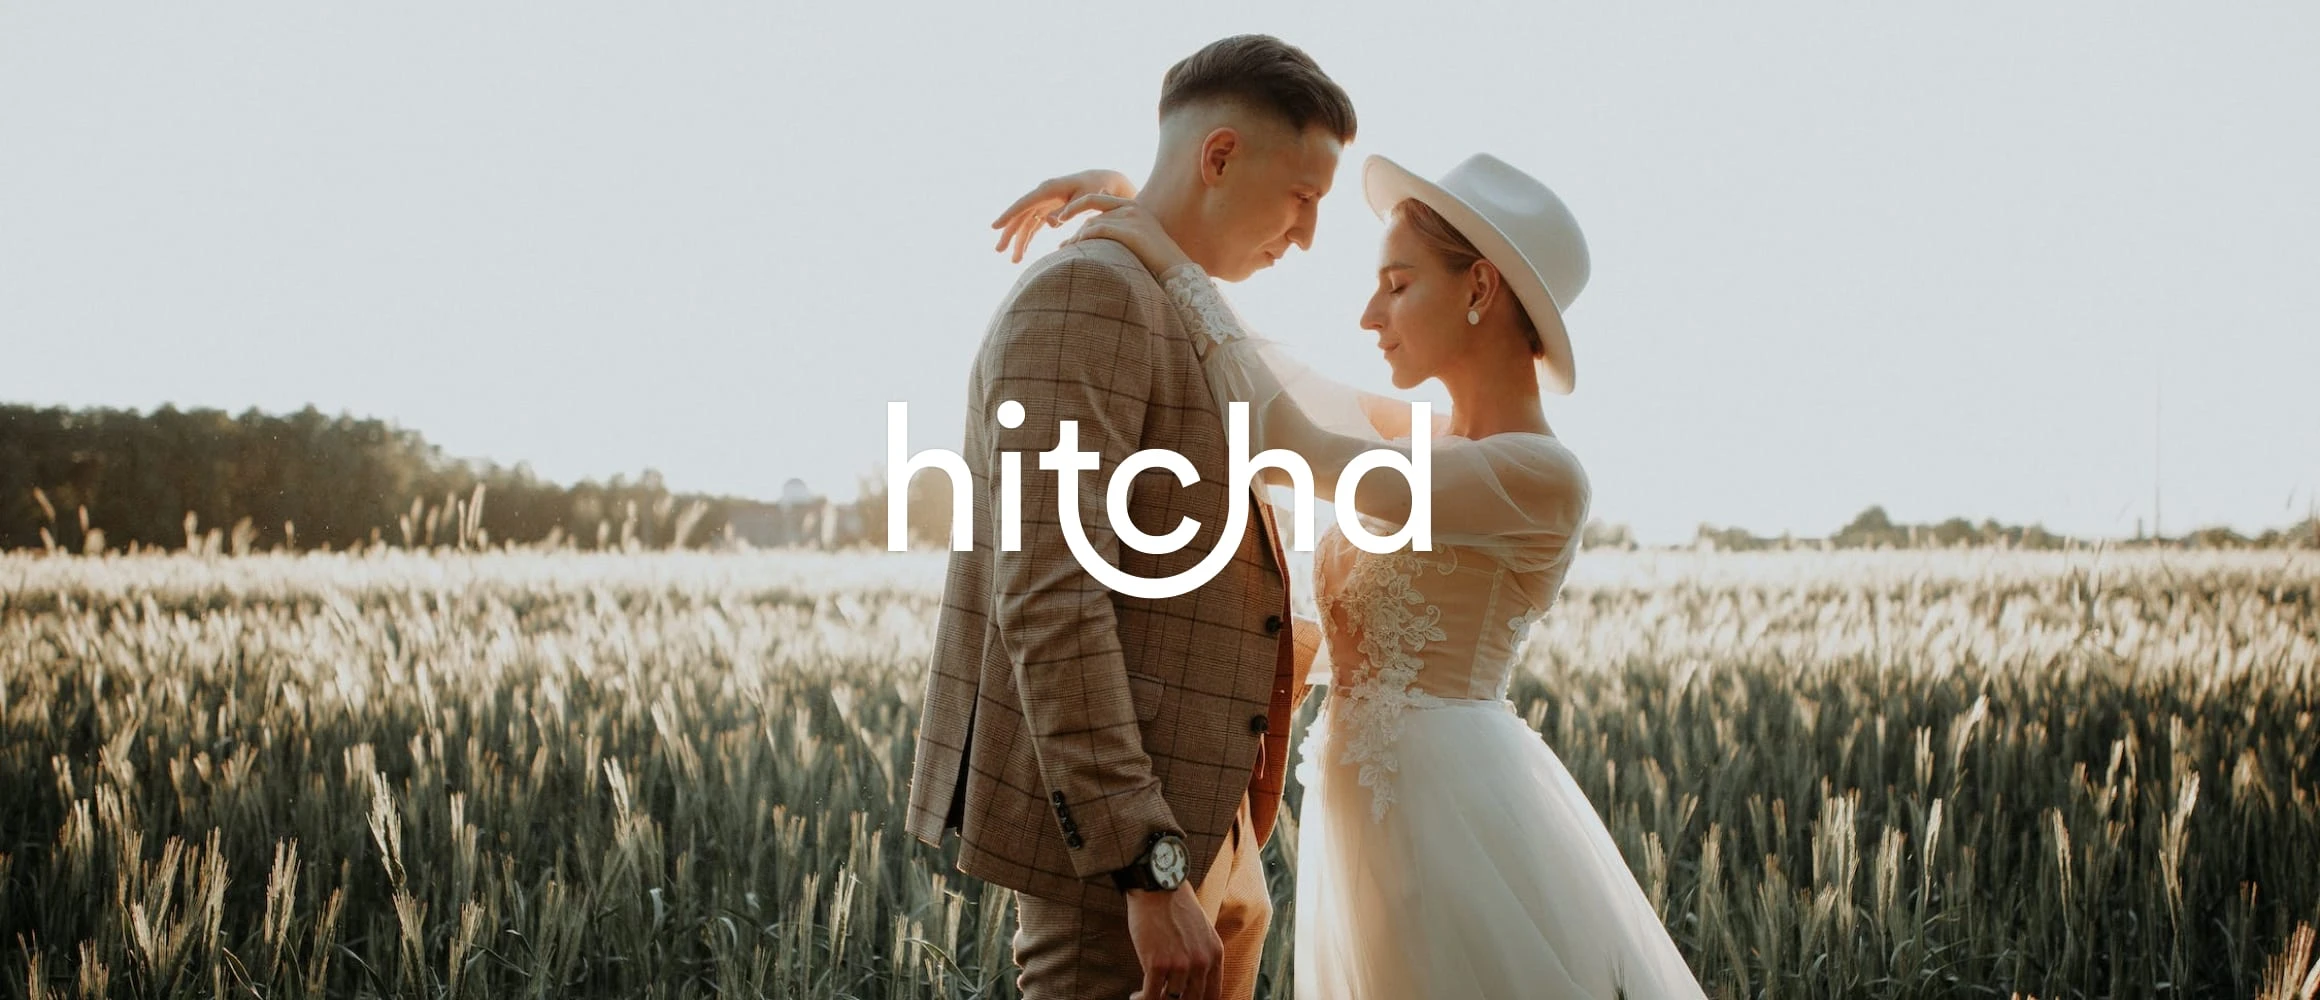 An editorial worthy wedding photograph of a beautiful couple in a field